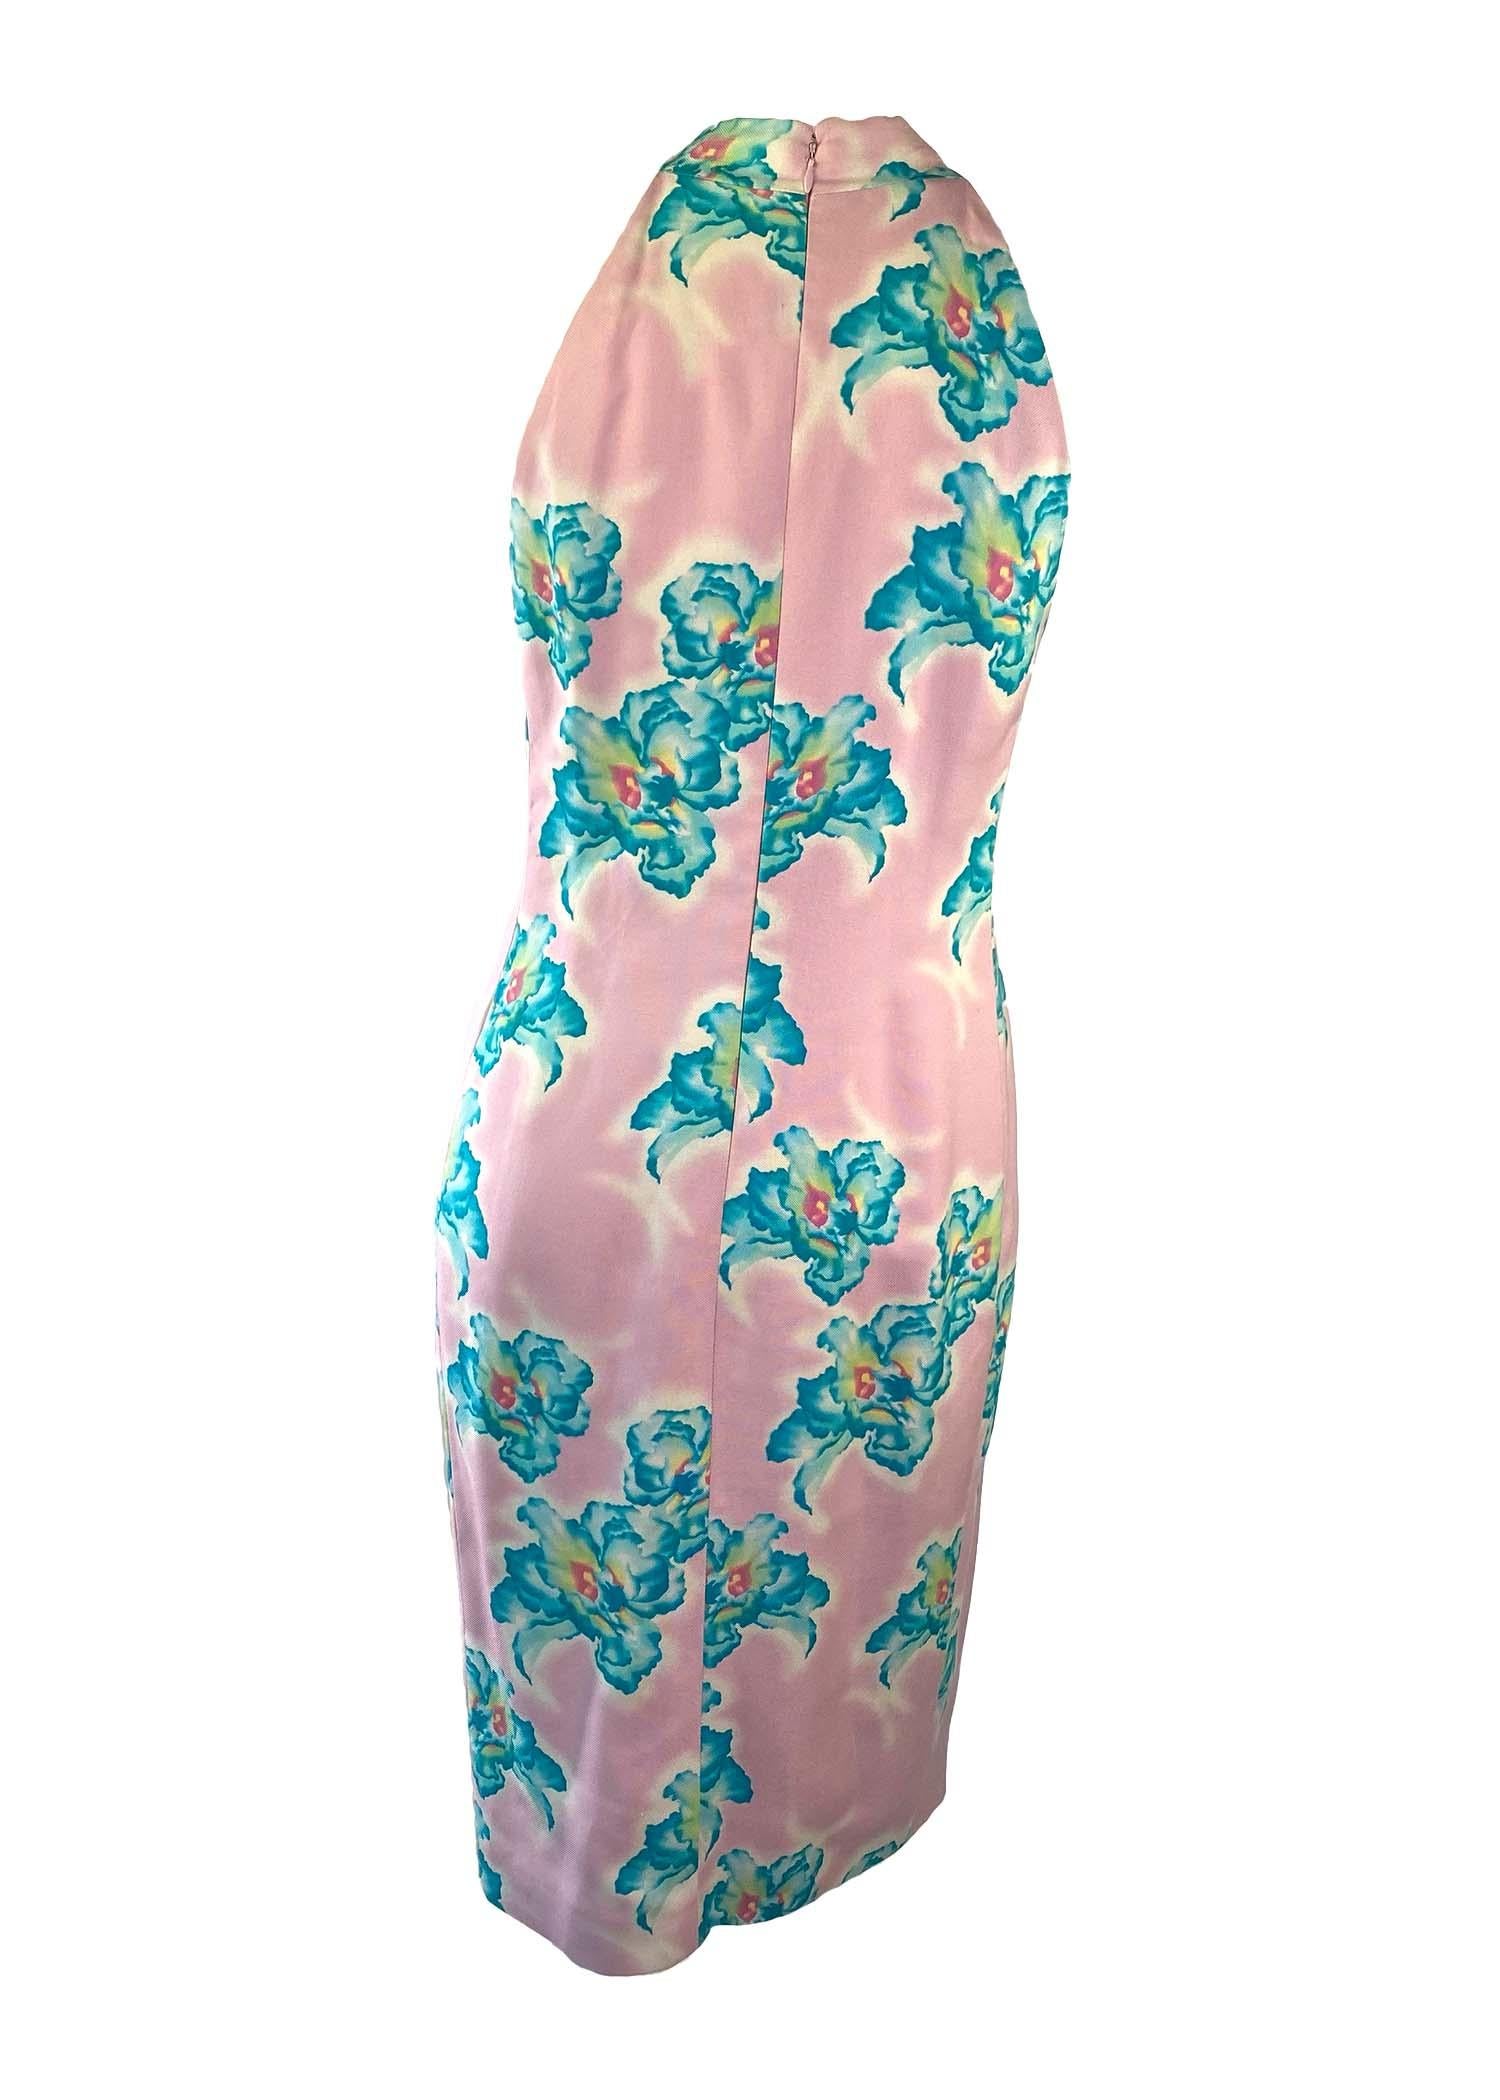 Gray S/S 1999 Gianni Versace by Donatella Pink Halter Neck Blue Floral Dress  For Sale